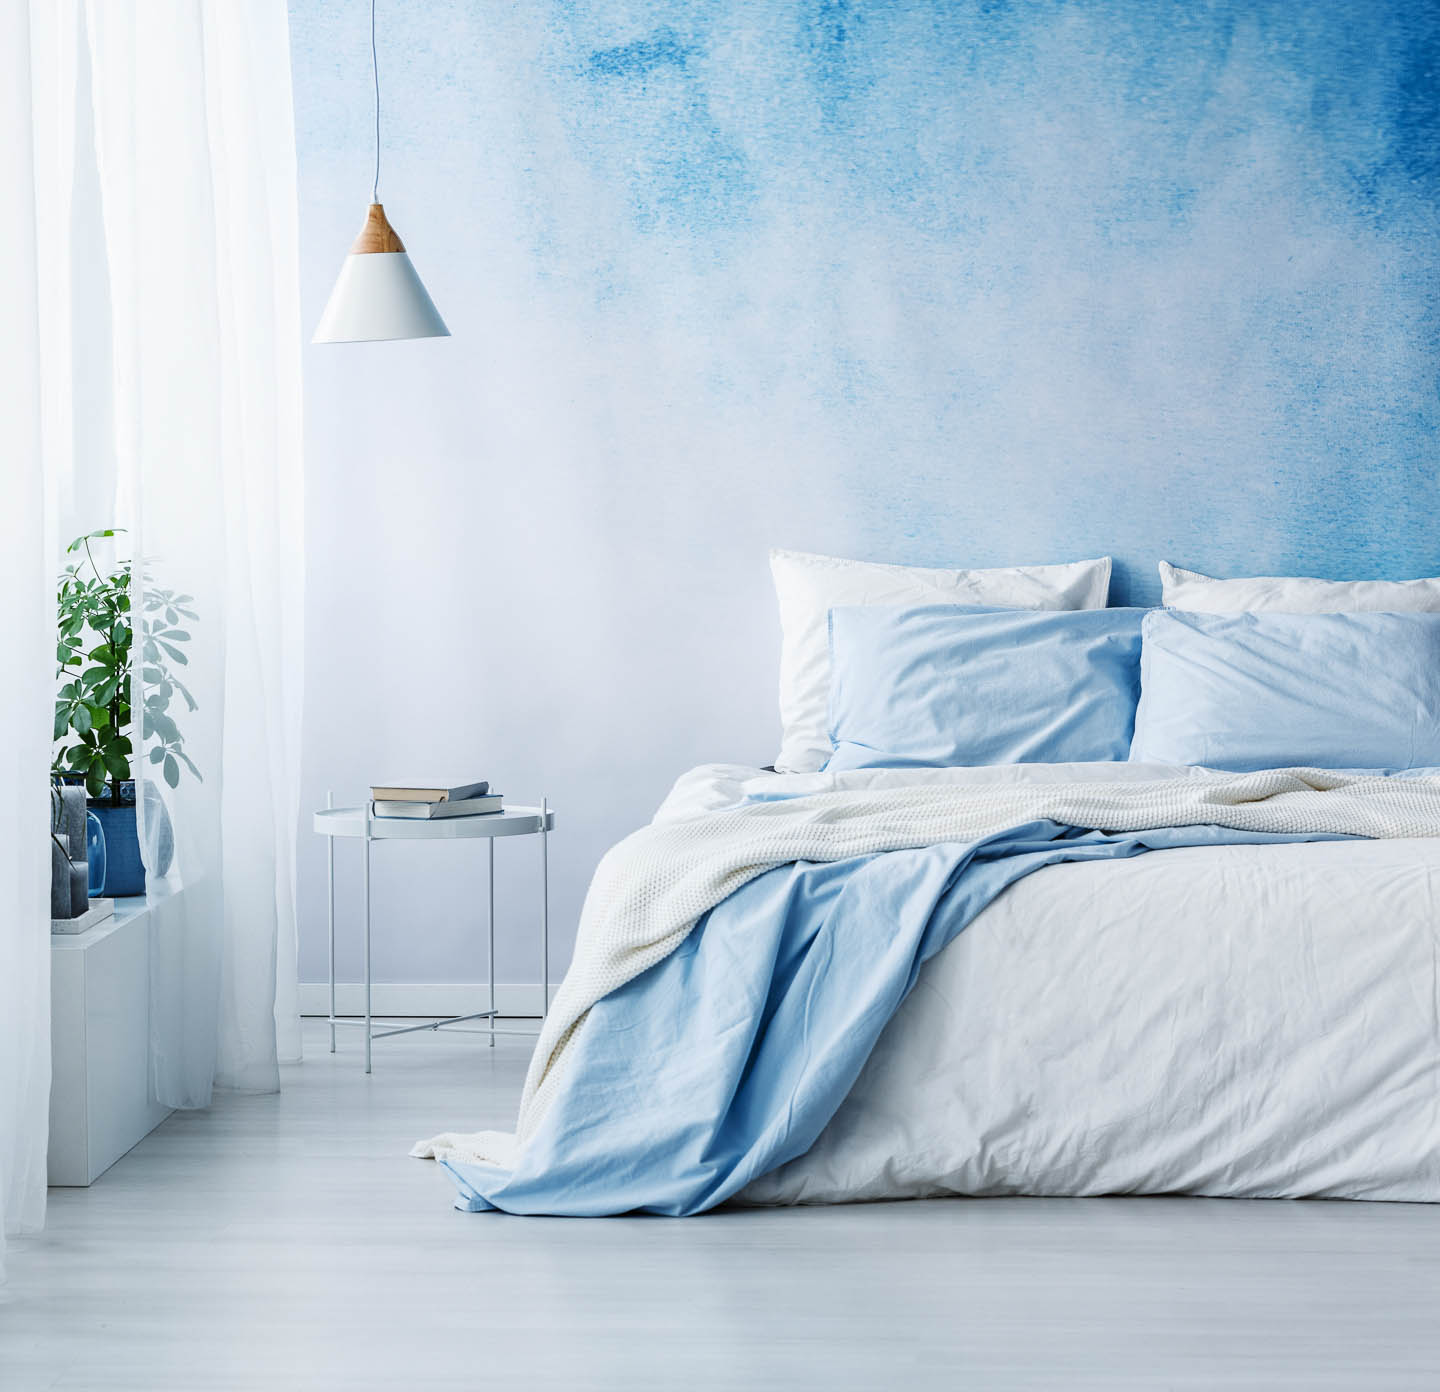 A bedroom with walls painted in an ombre blue pattern behind a bed with white and light blue bedding